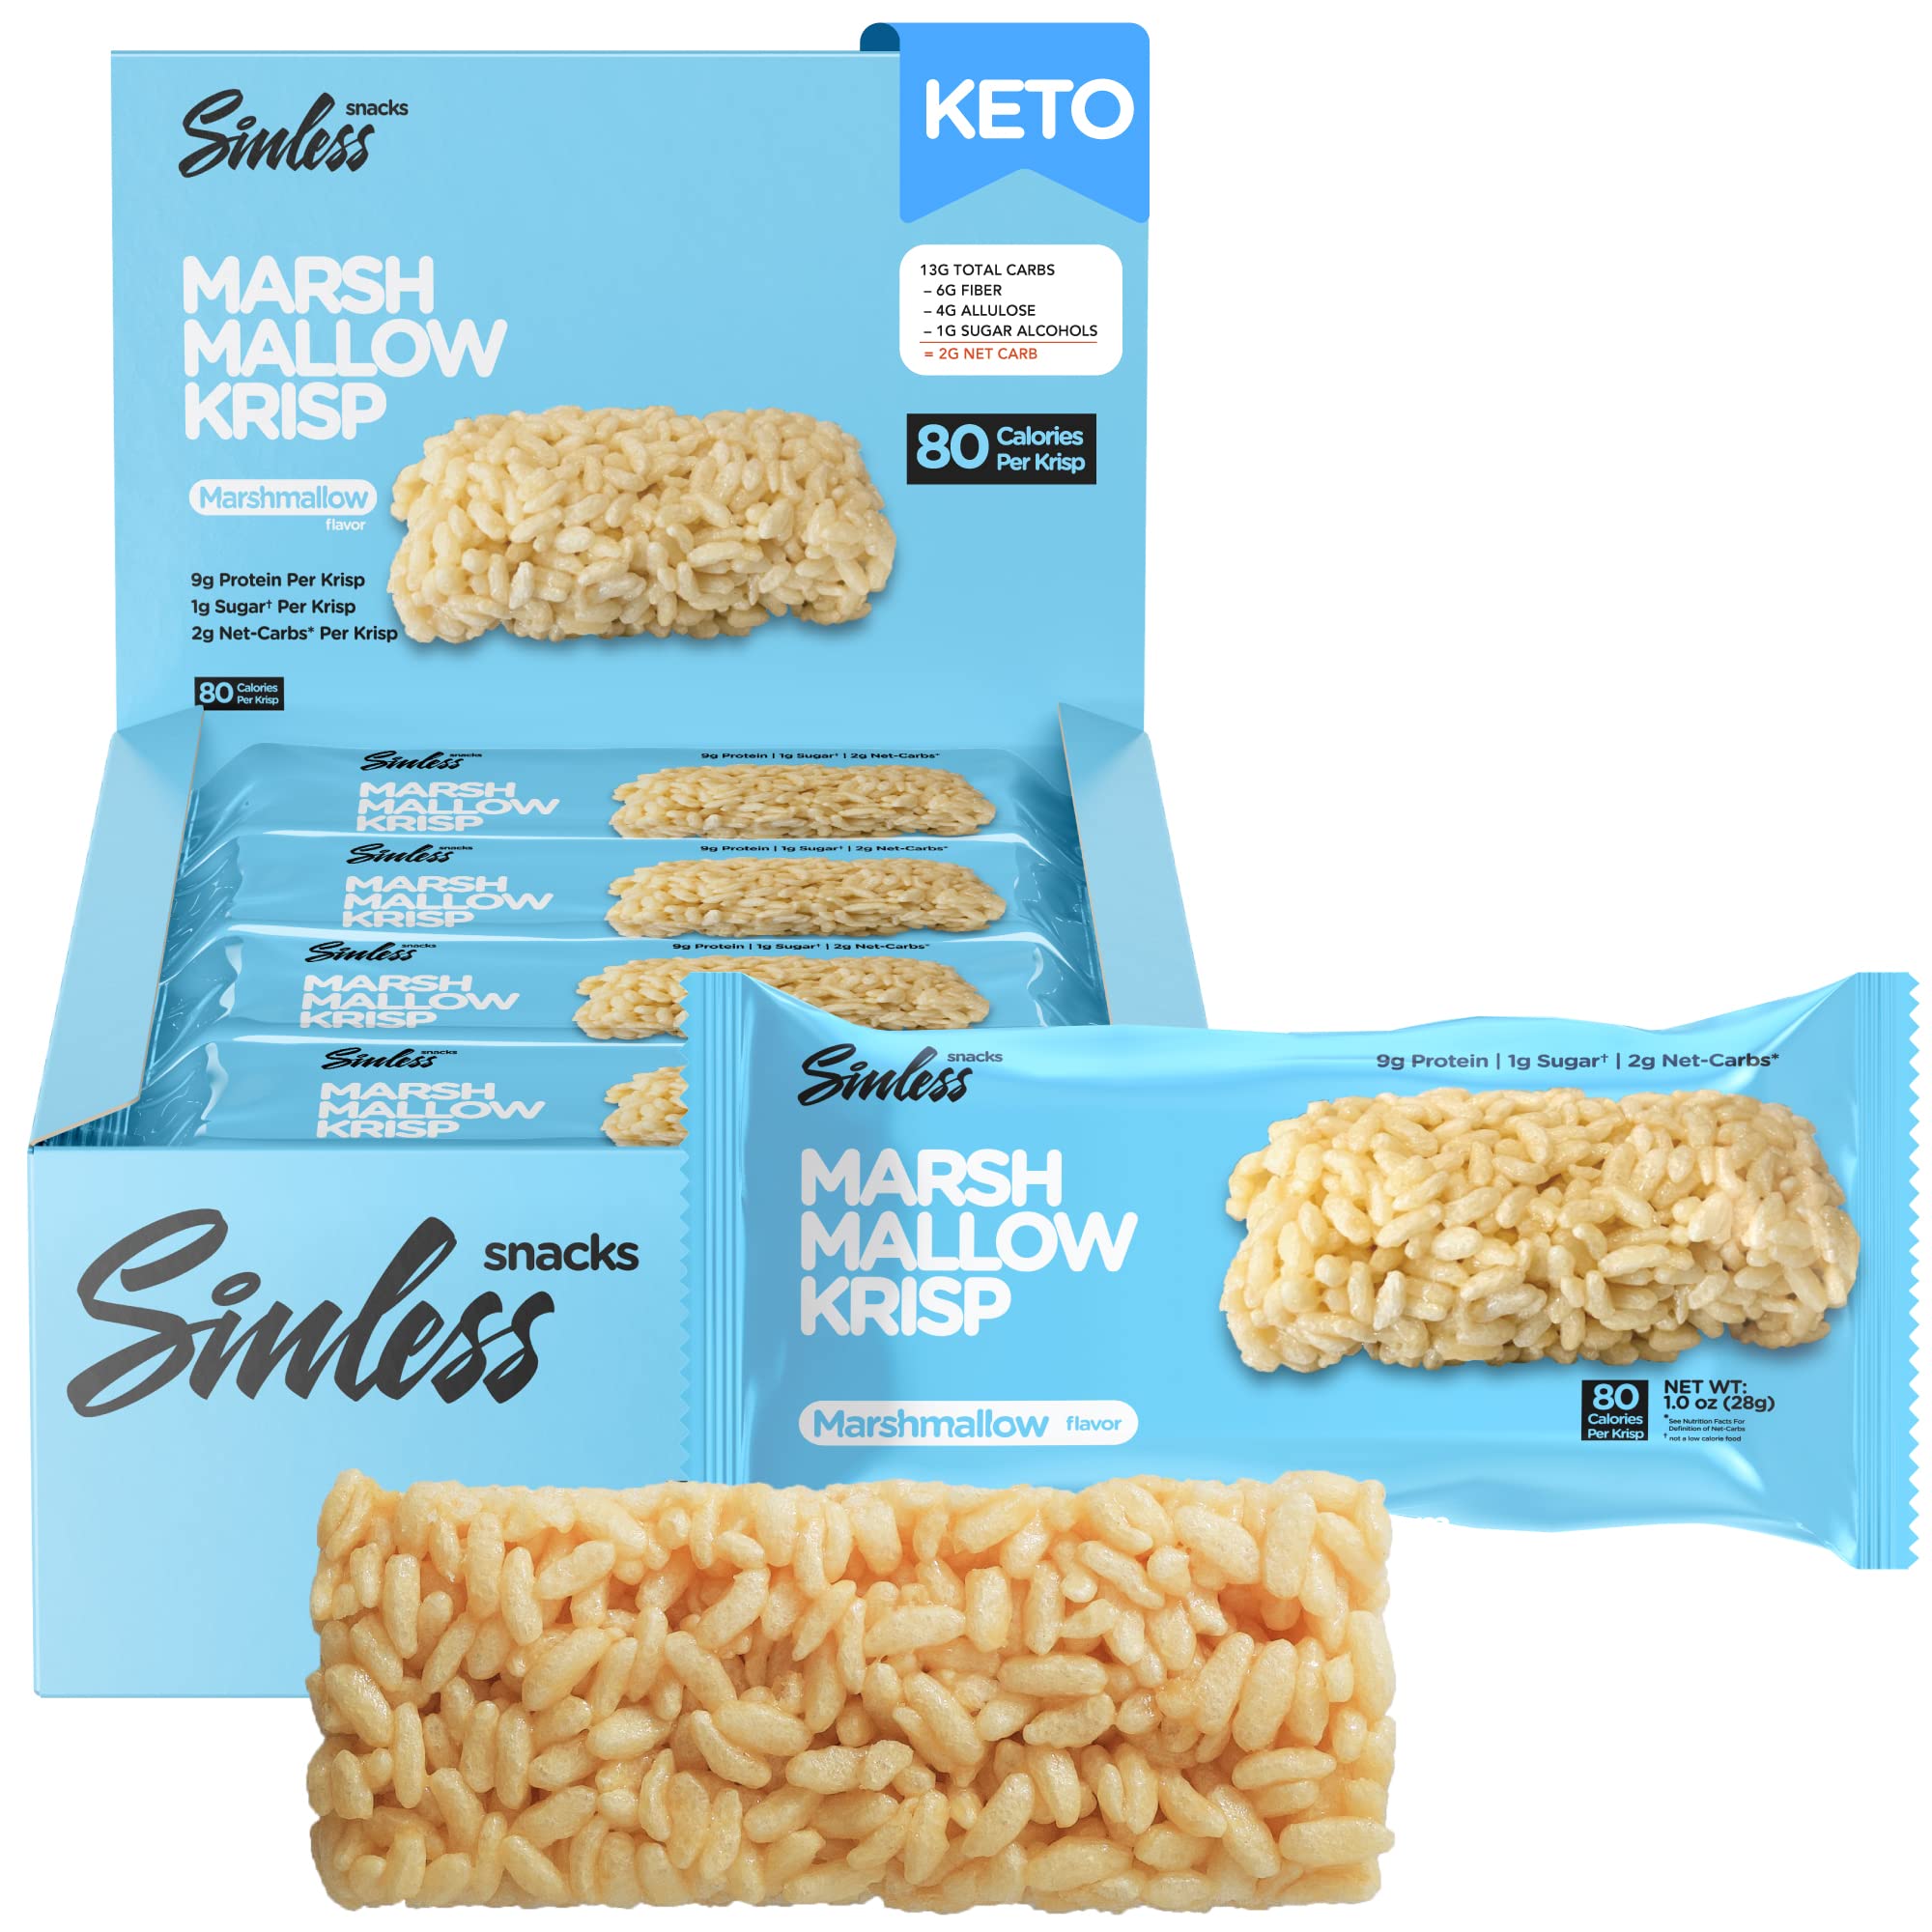 Sinless Snacks Marsh Mallow Krisp - Perfect Keto Snacks - Delicious Gluten Free Low Carb Snacks - Marshmallow Keto Cereal Bars - Low Sugar Snack - Only 1g Sugar - 9g Protein - 2g Net-Carbs - 8 Pack